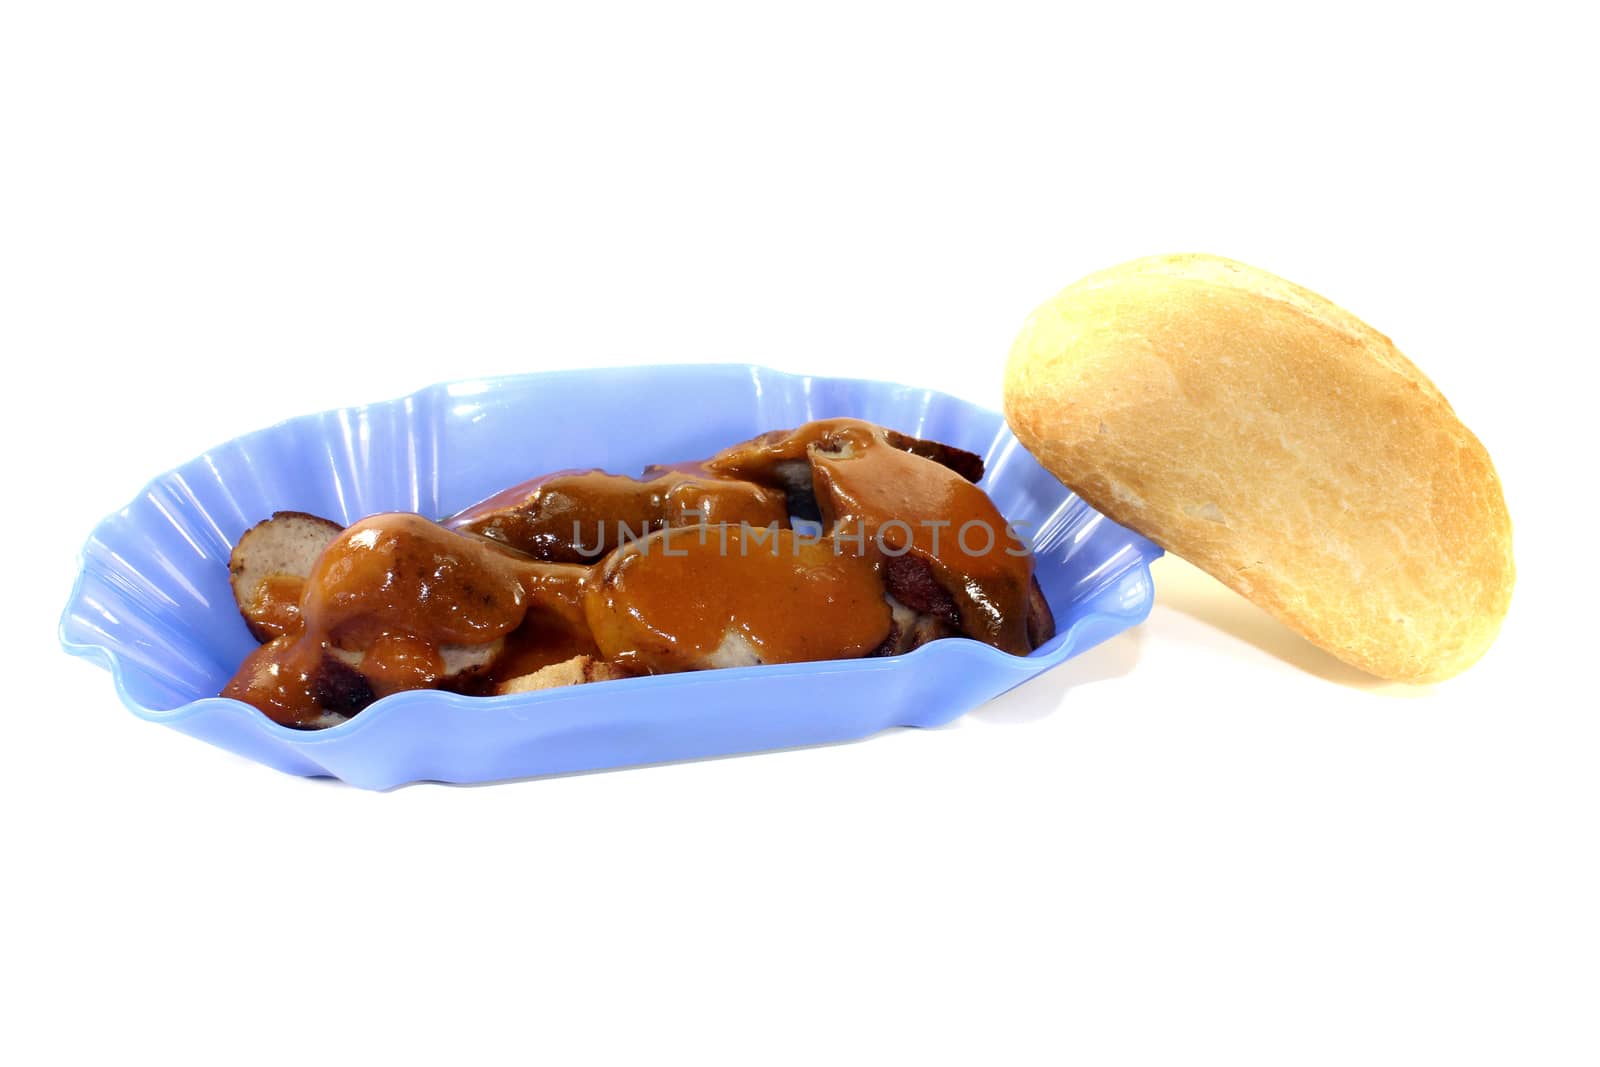 Currywurst with bun in a bowl on a light background